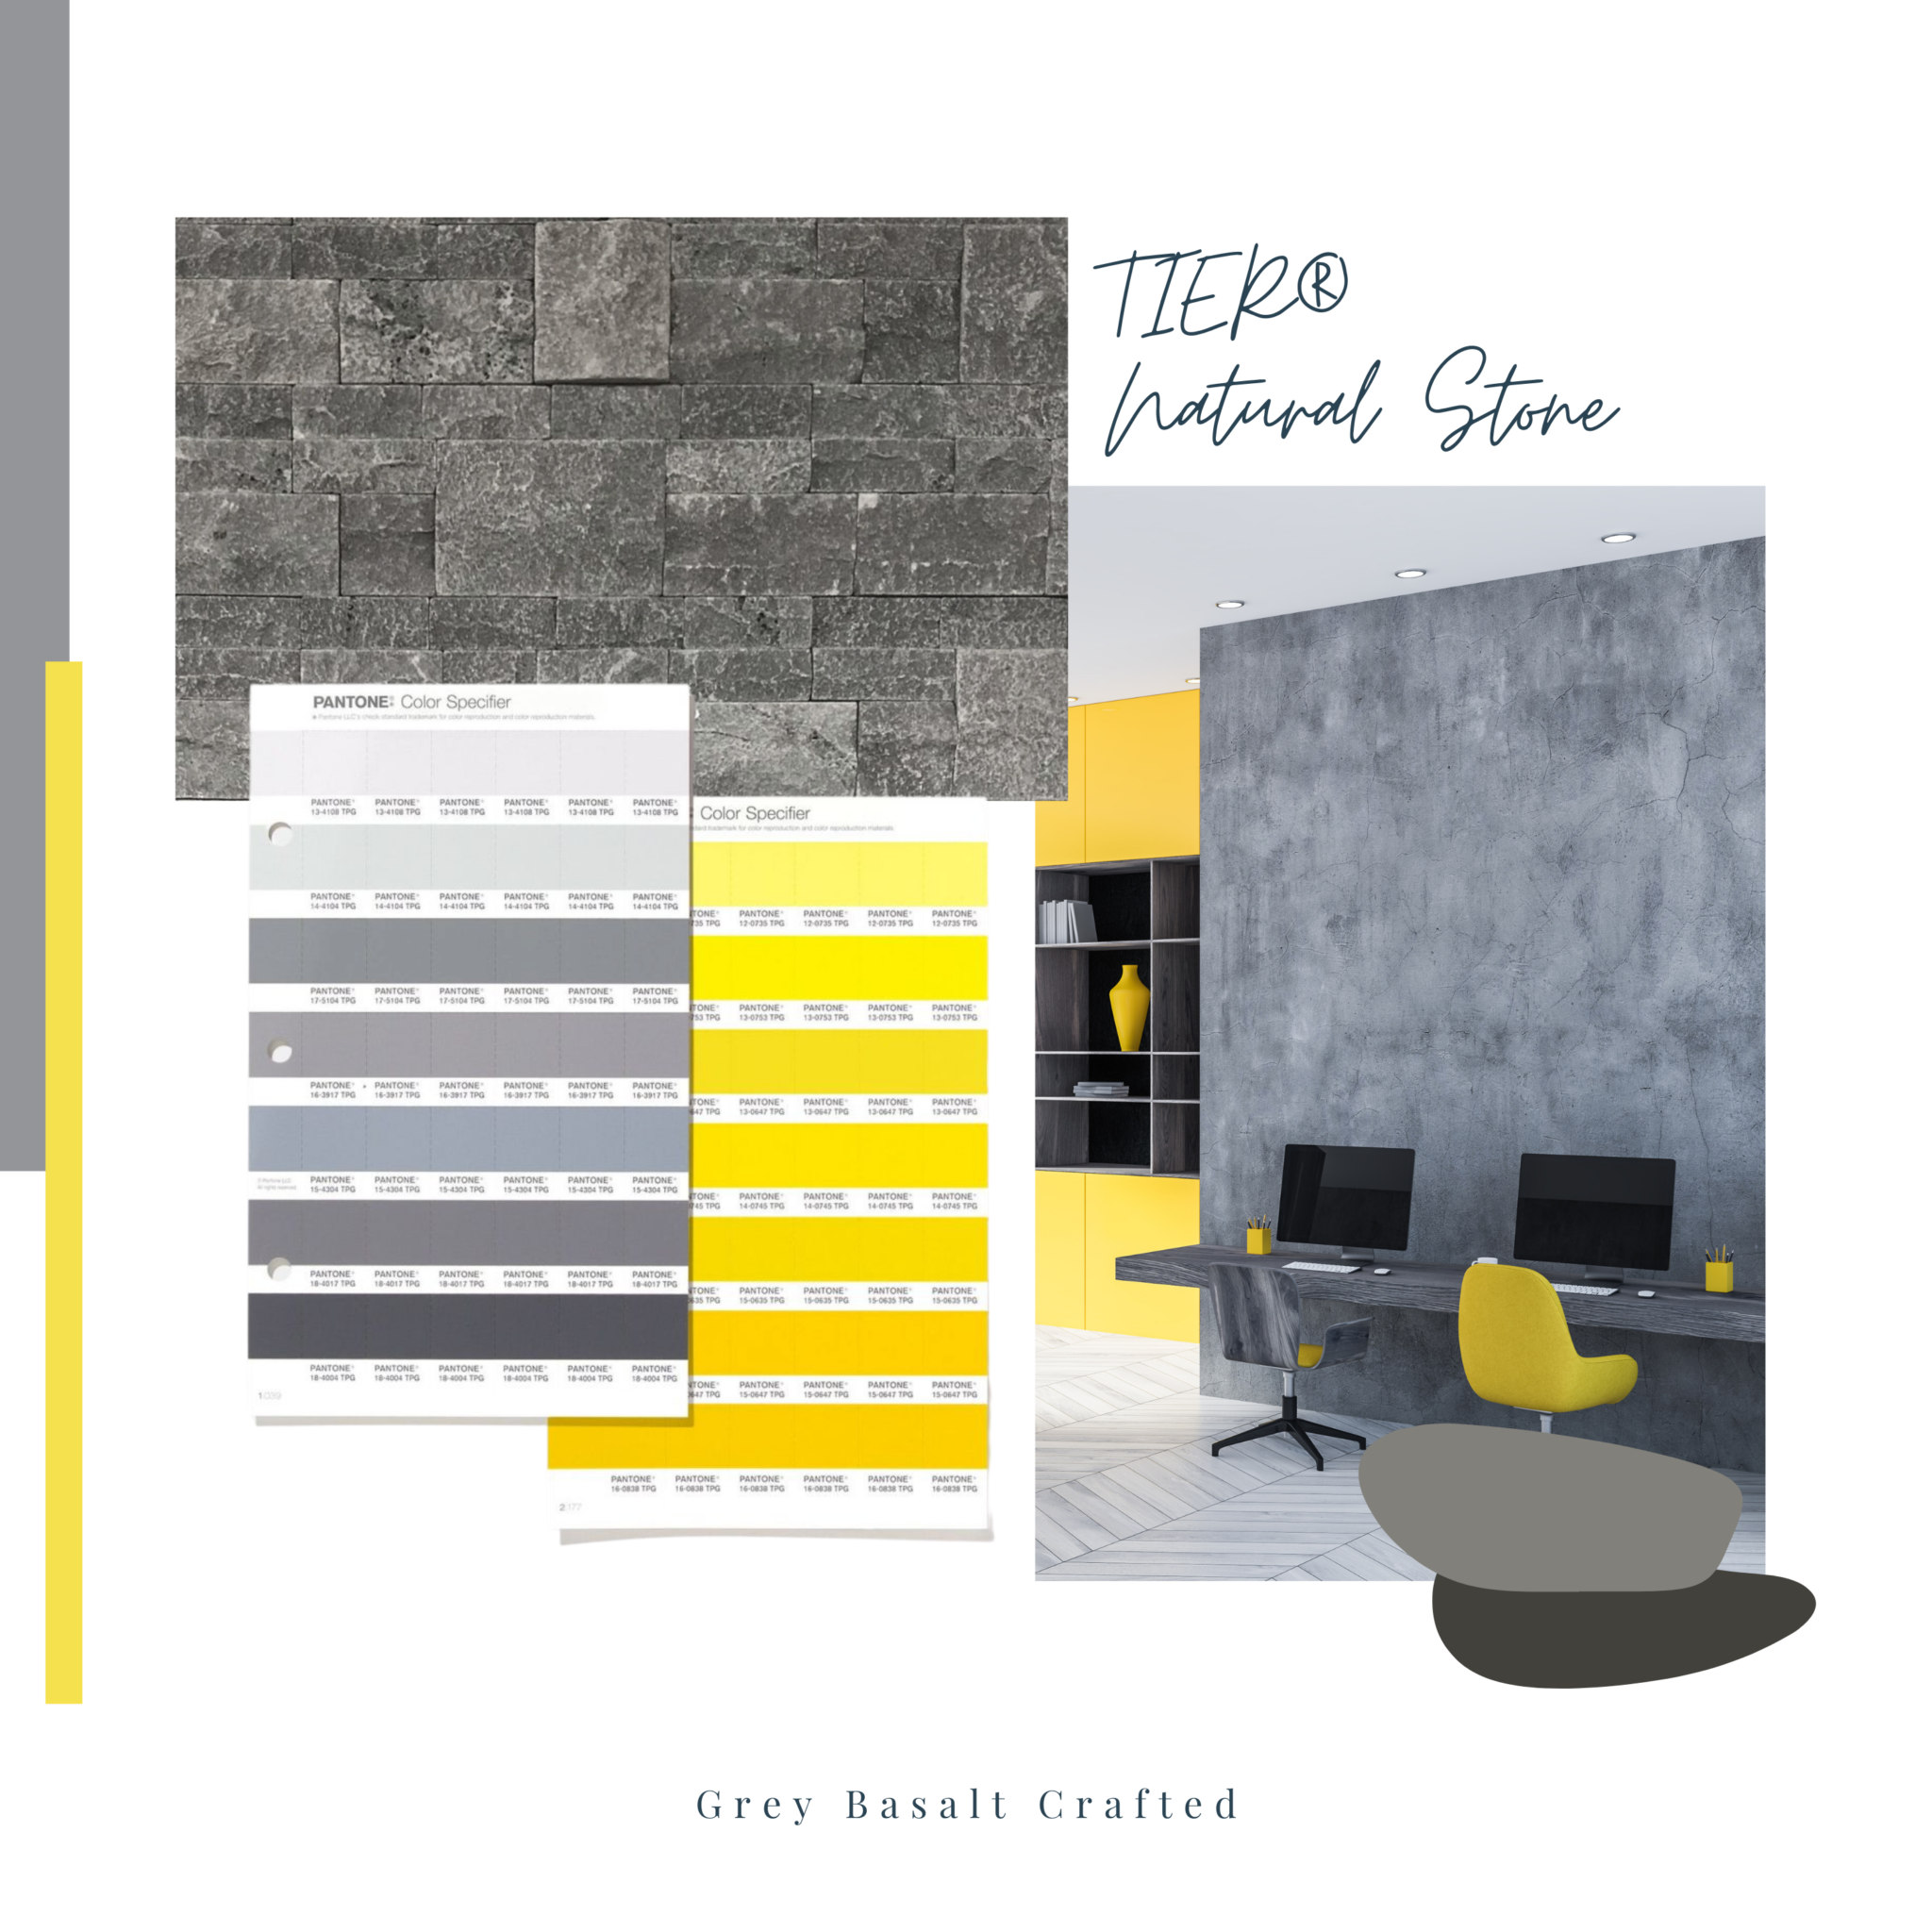 How to Pair 2021's Pantone Colors with our Stone Veneers - TIER® Natural Stone